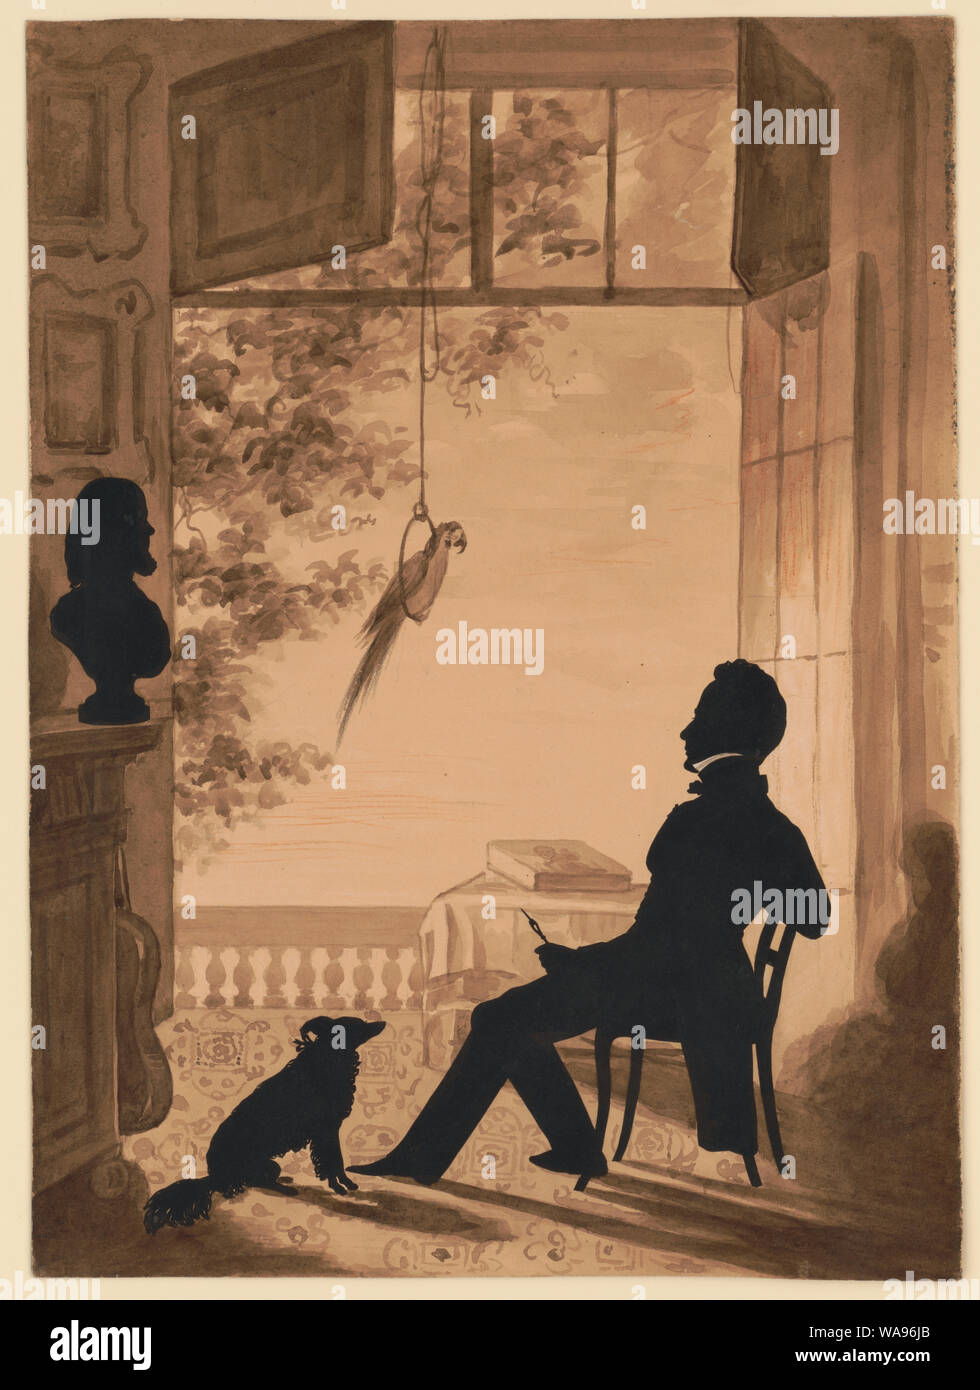 Charles Fenderich Abstract: Drawing shows a full-length silhouette of artist Charles Fenderich seated on a chair in a room near an open balcony.  Fenderich holds a lithograph crayon in his left hand, a silhouette of a dog sits at his feet and a silhouette bust portrait of artist Augustin Edouart is on a pedestal to the left of the picture. A parrot rests on a hanging perch near the center of the scene. Stock Photo